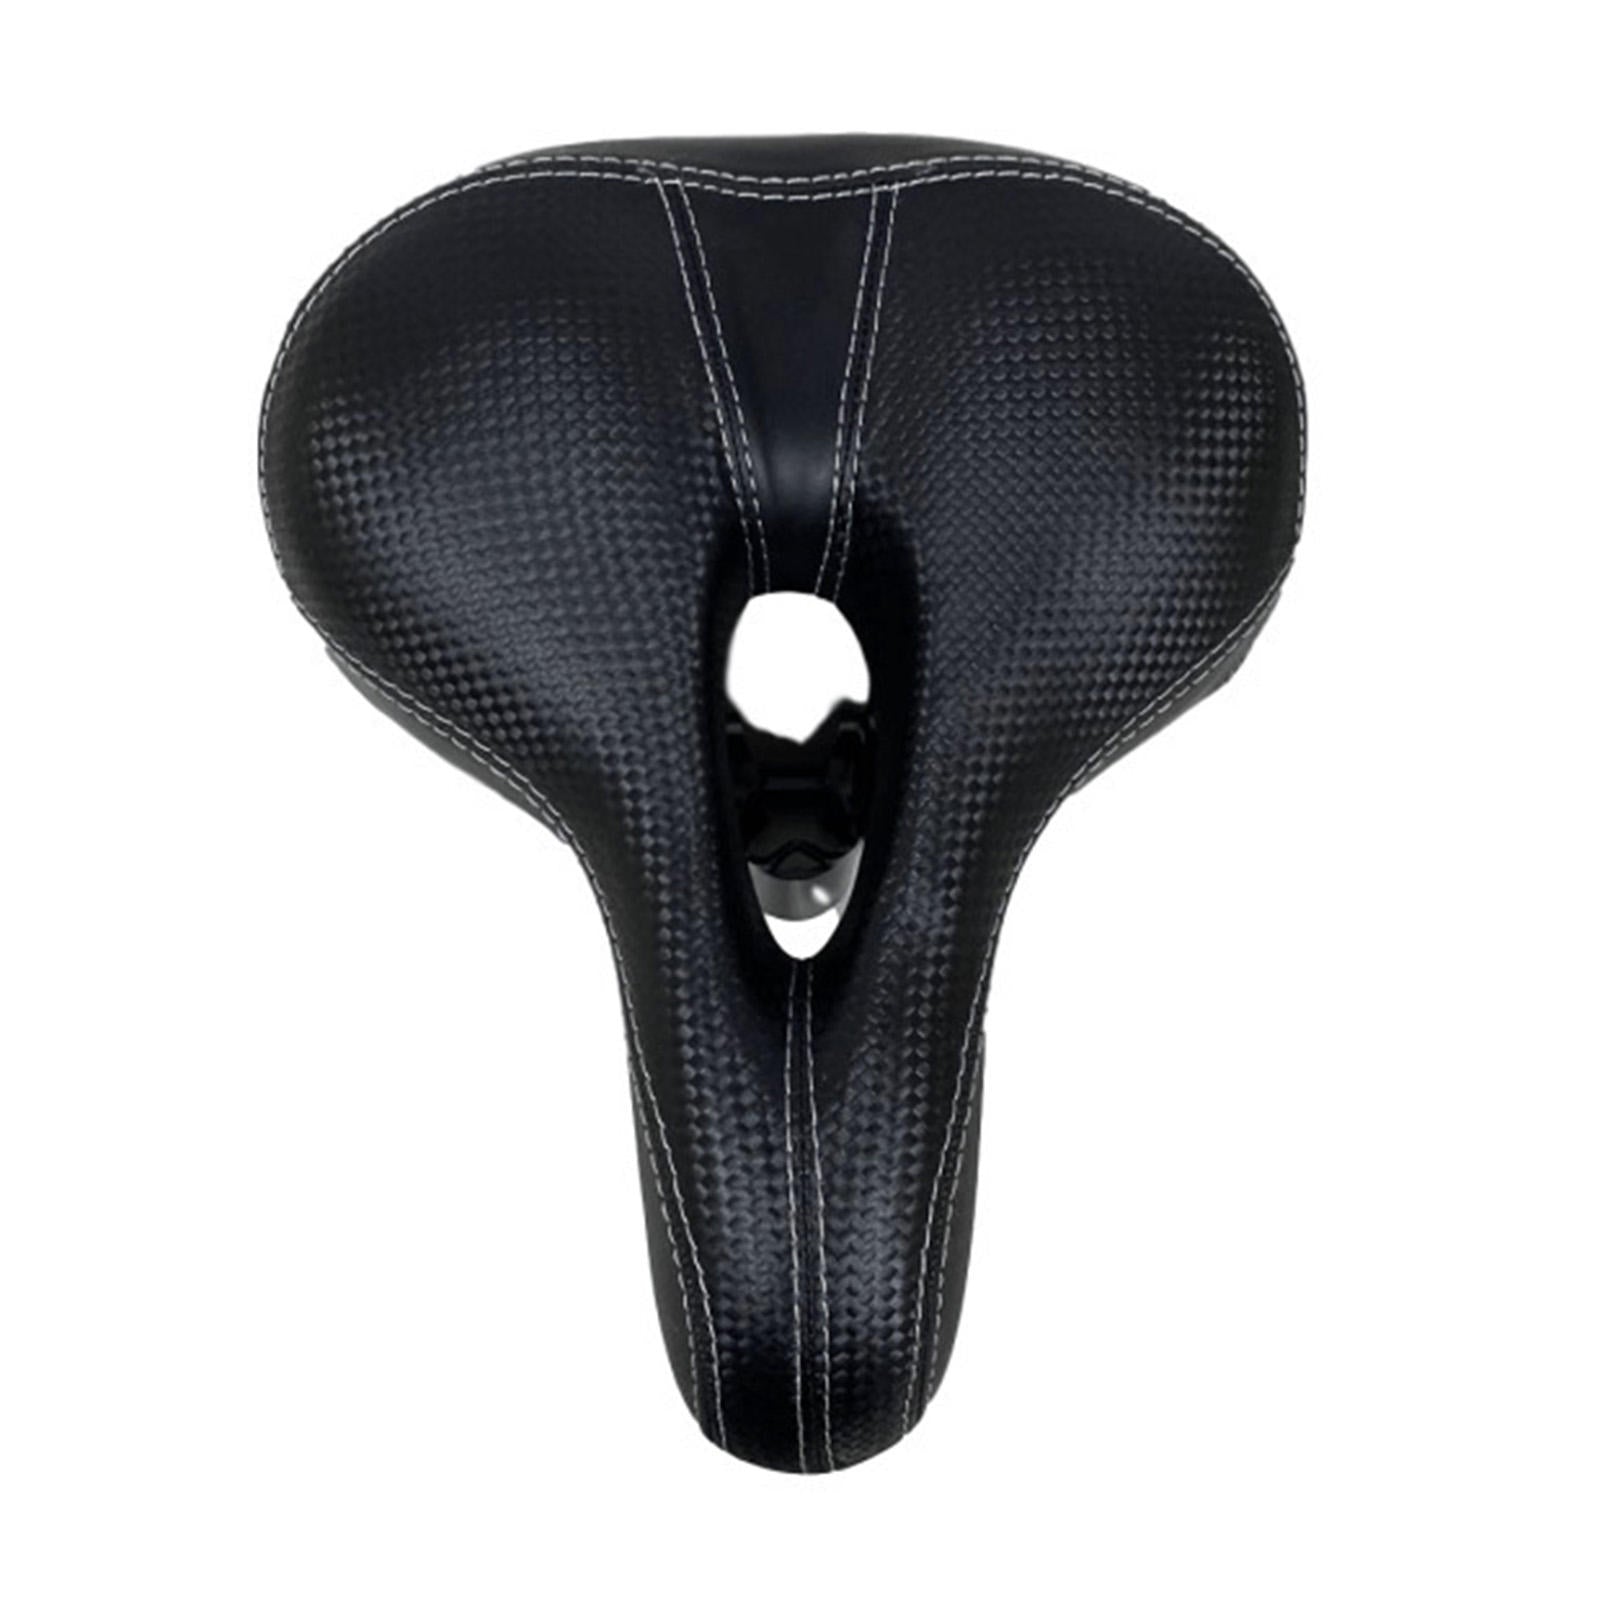 Comfortable Bike Seat Cushion -Bicycle Seat for Men Women with Double Shock